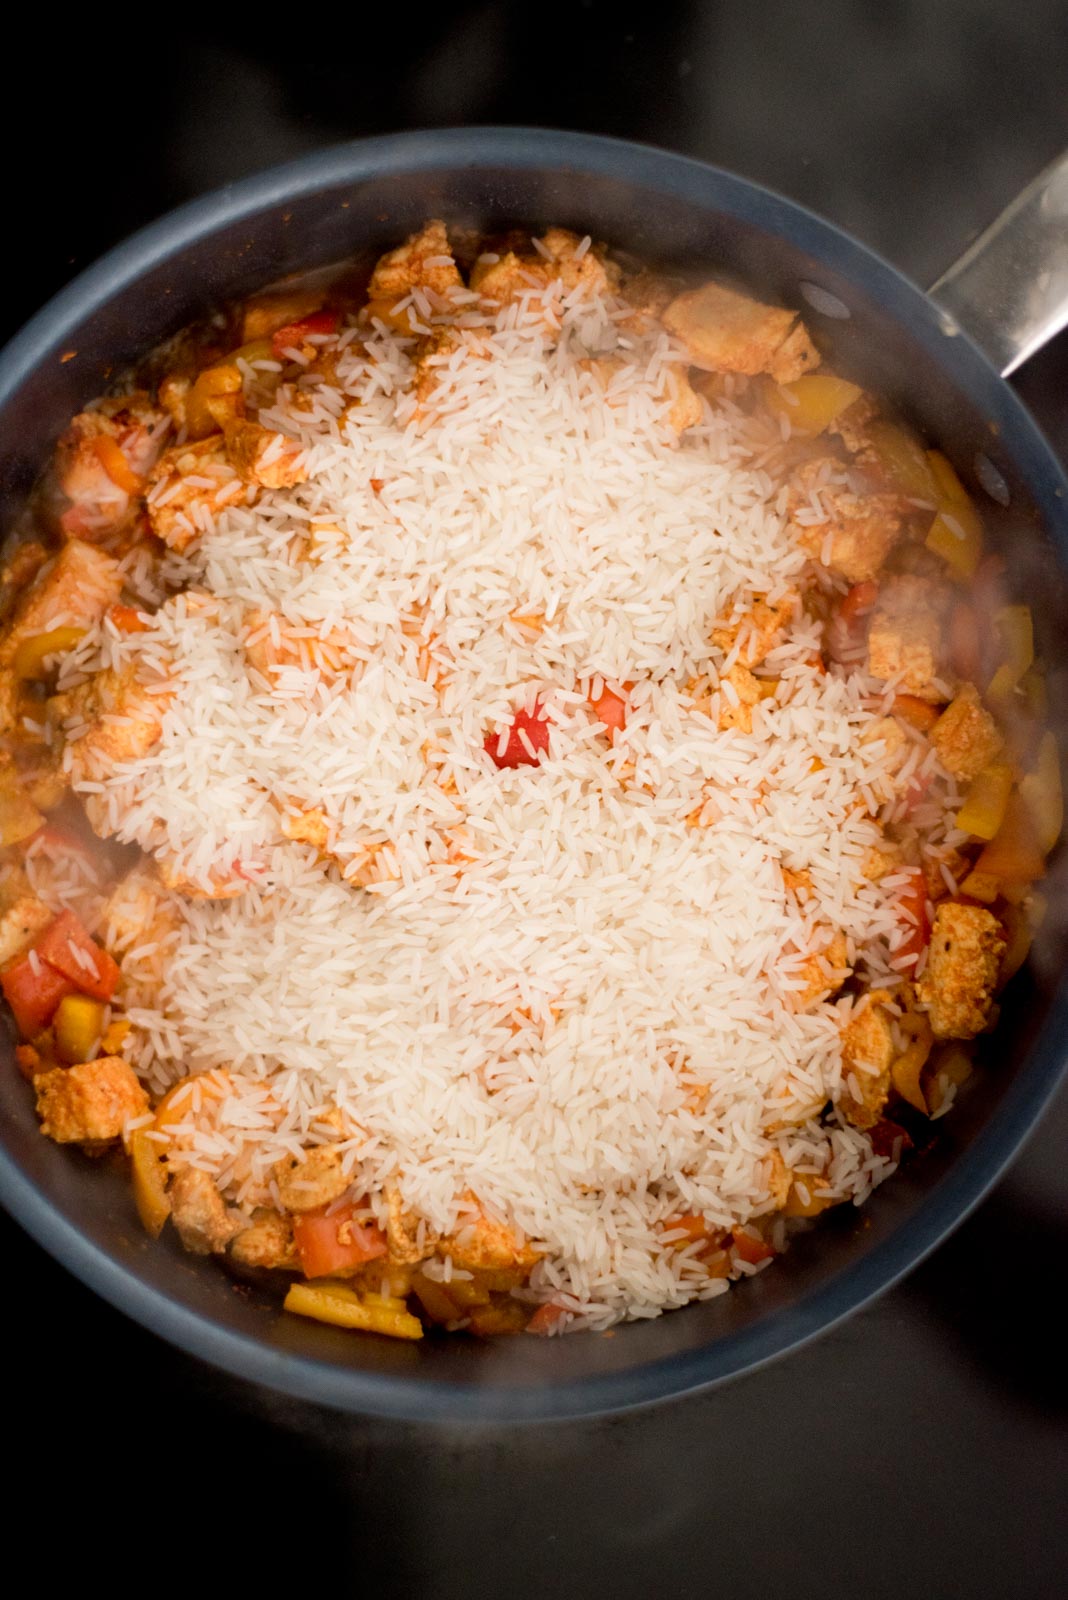 Rice added to the skillet on the stove with the cooked chicken and bell peppers.